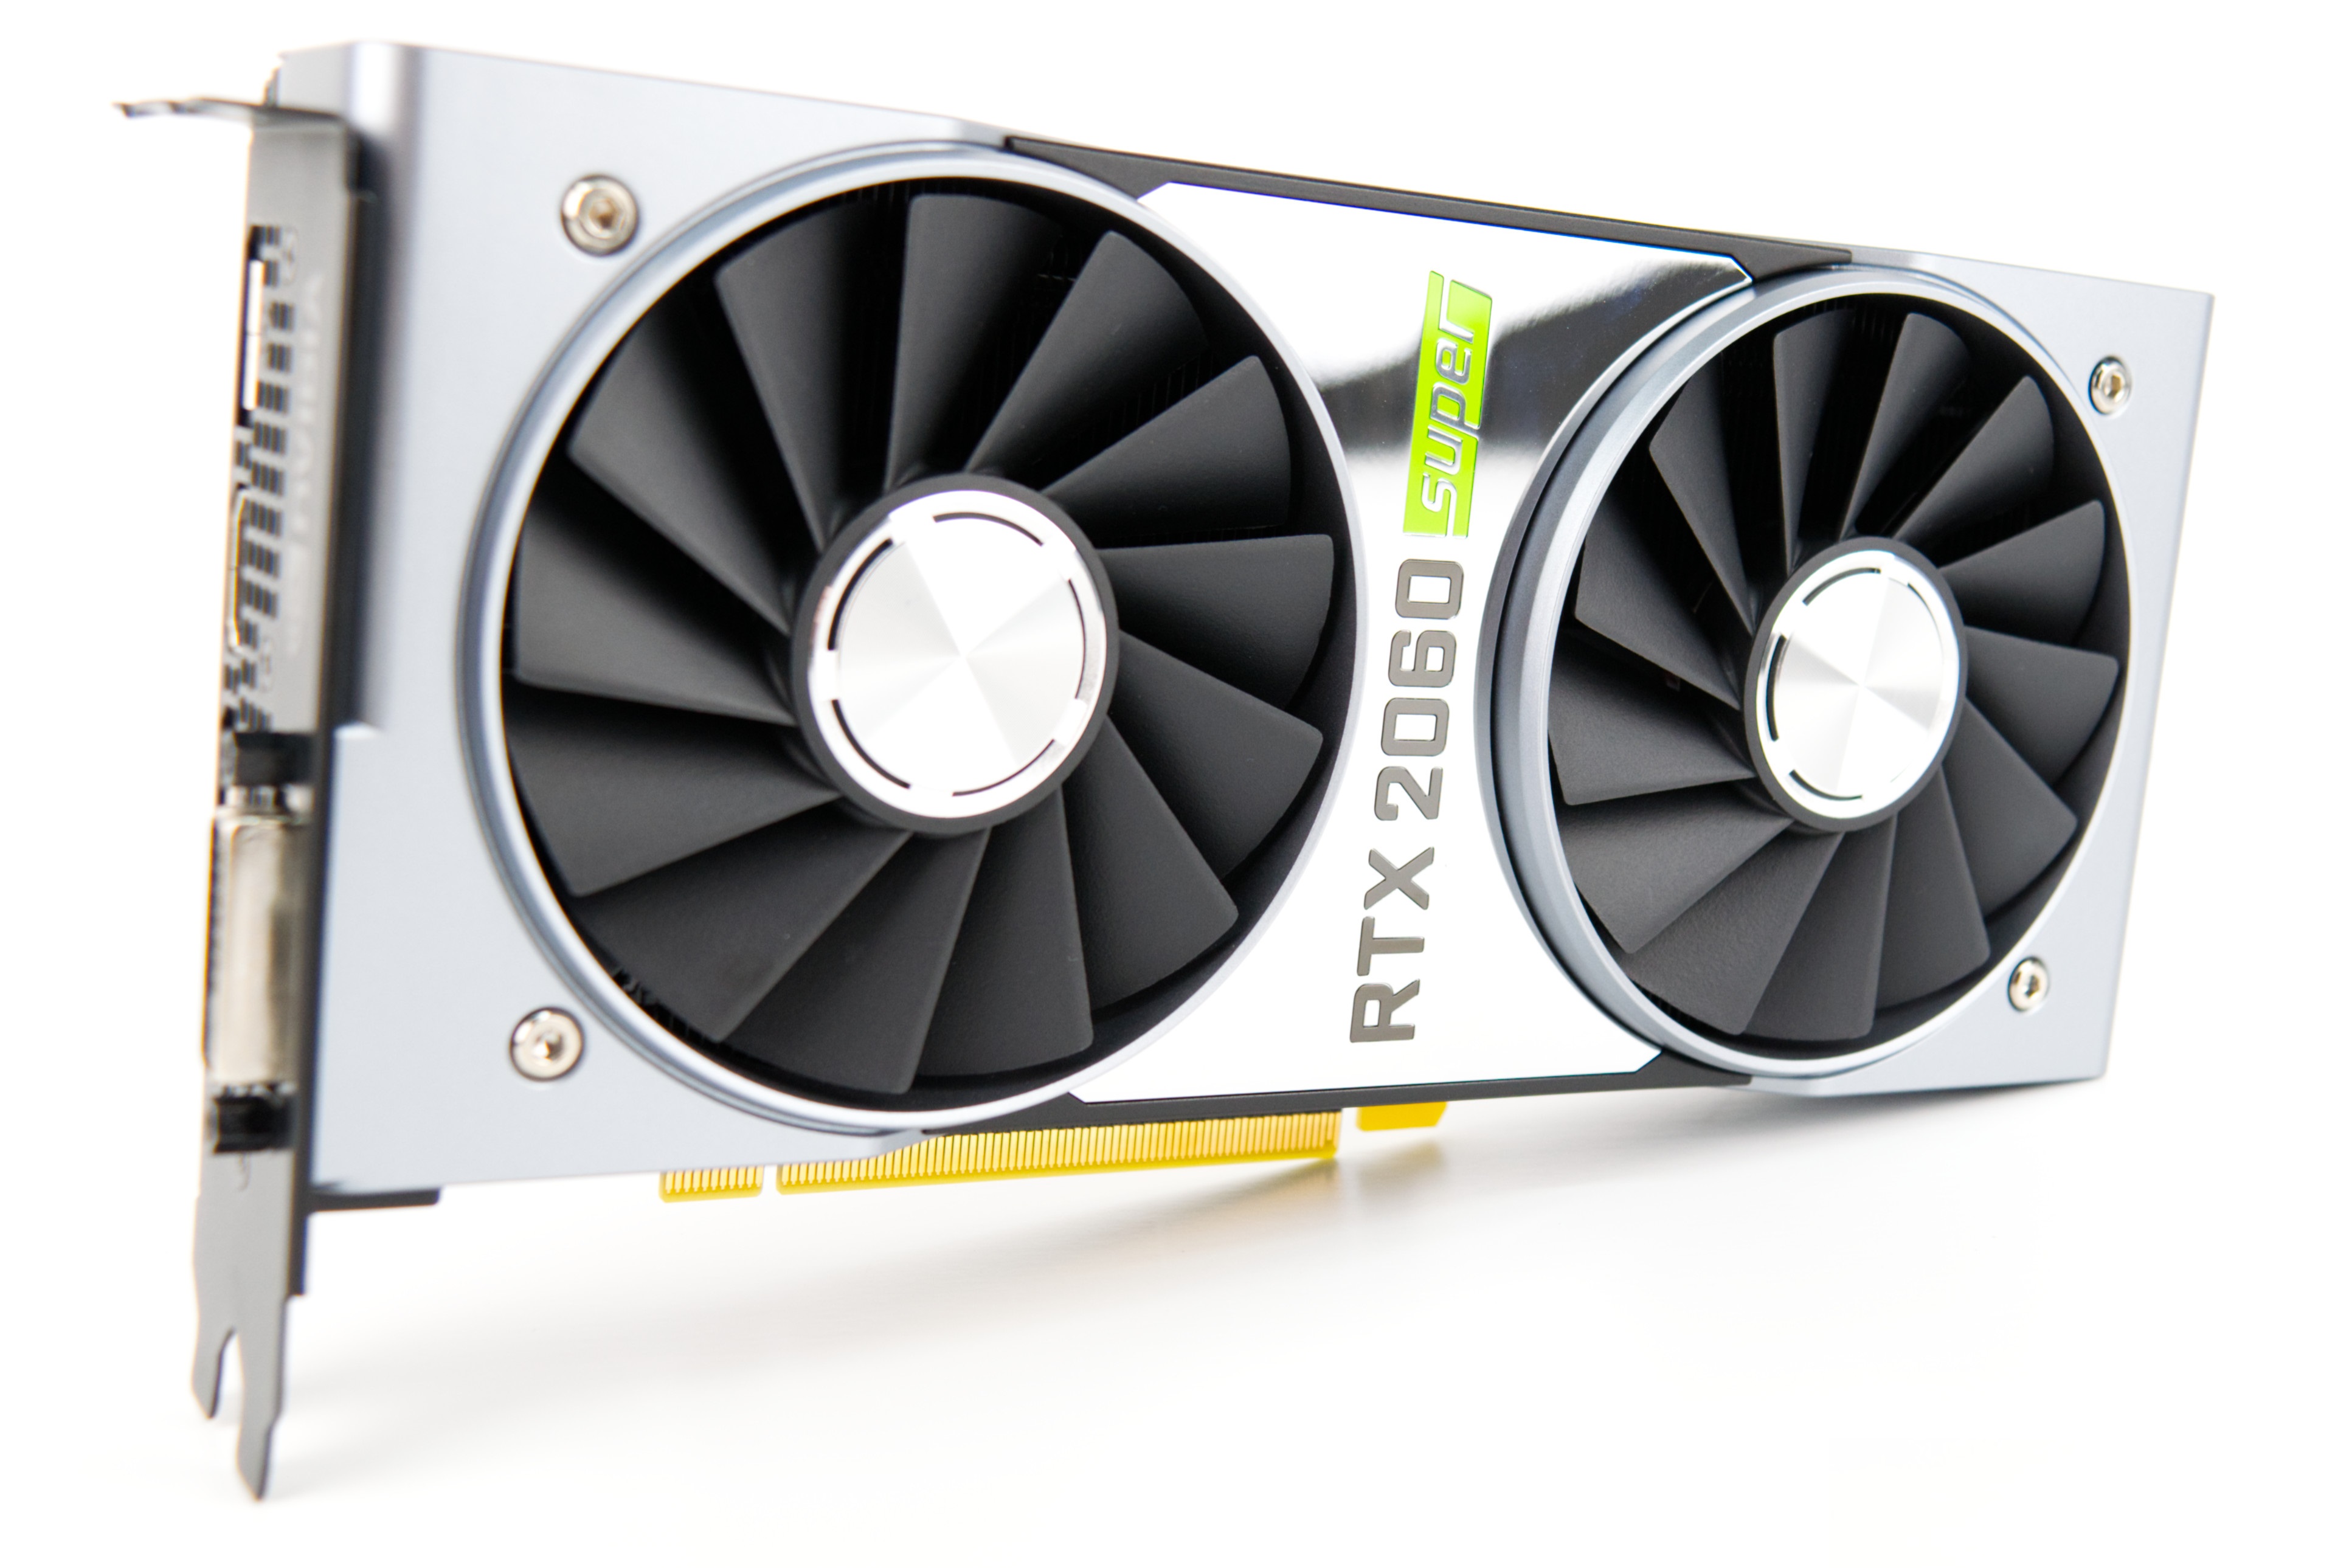 Nvidia GeForce RTX 2060 Super Review: The entry-level GPU comes with 8 of VRAM - NotebookCheck.net Reviews